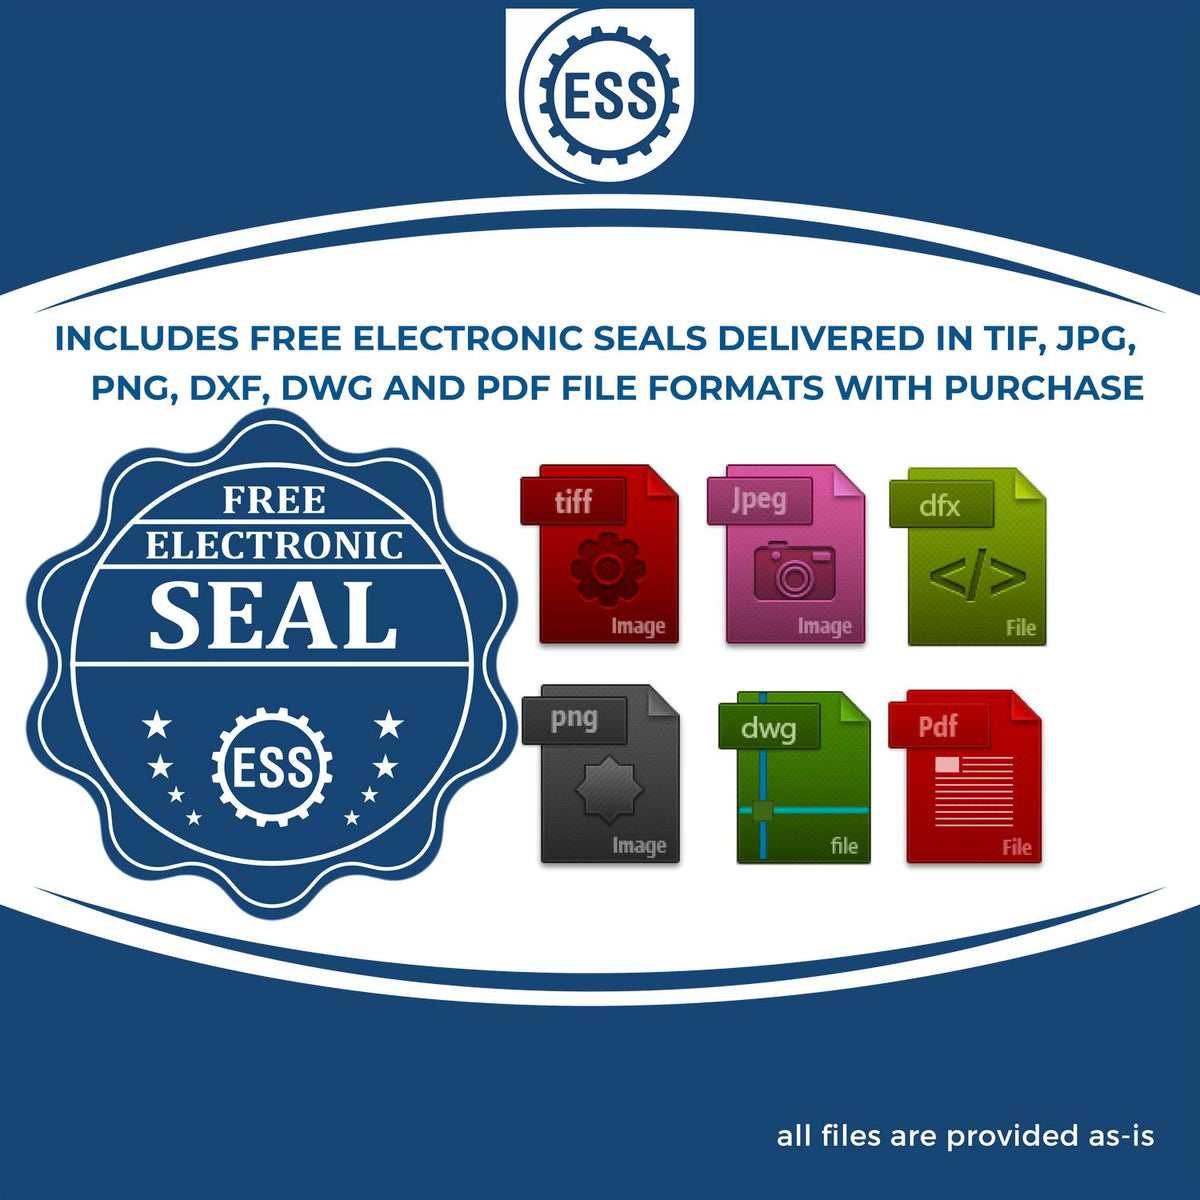 An infographic for the free electronic seal for the Self-Inking State Seal Connecticut Notary Stamp illustrating the different file type icons such as DXF, DWG, TIF, JPG and PNG.